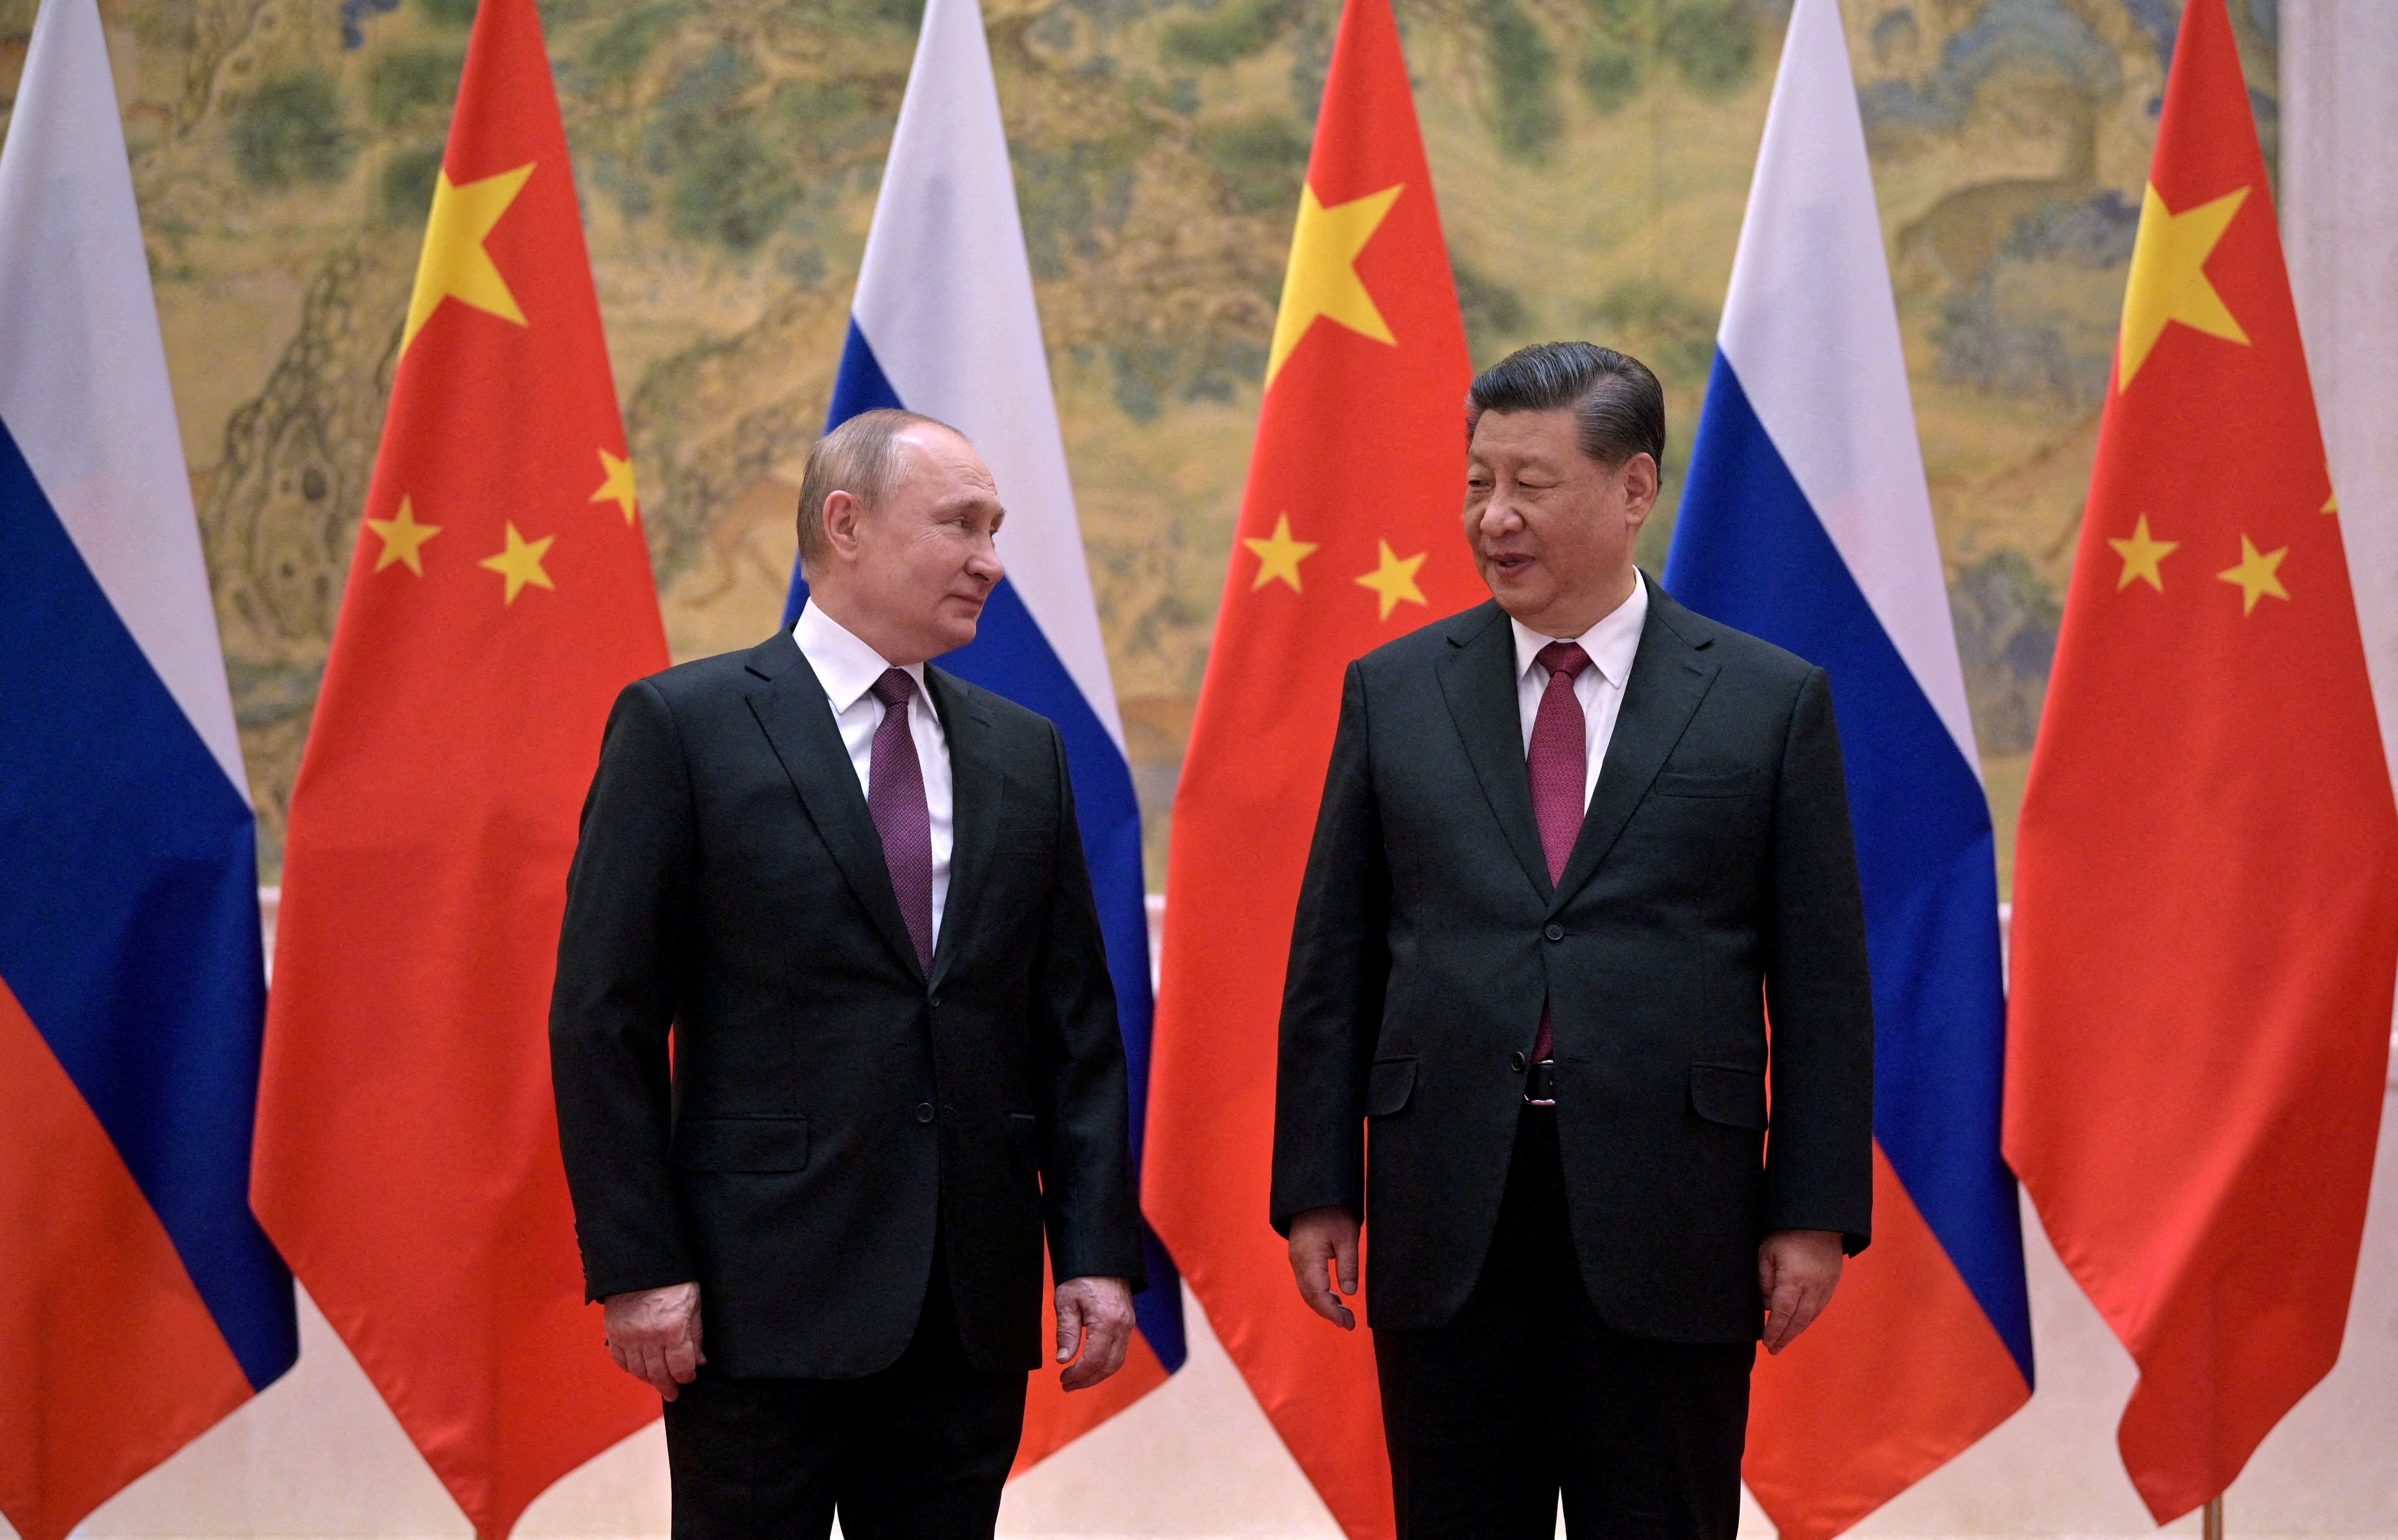 FILE PHOTO: Russian President Vladimir Putin attends a meeting with Chinese President Xi Jinping in Beijing, China February 4, 2022. Sputnik/Aleksey Druzhinin/Kremlin via REUTERS ATTENTION EDITORS - THIS IMAGE WAS PROVIDED BY A THIRD PARTY./File Photo